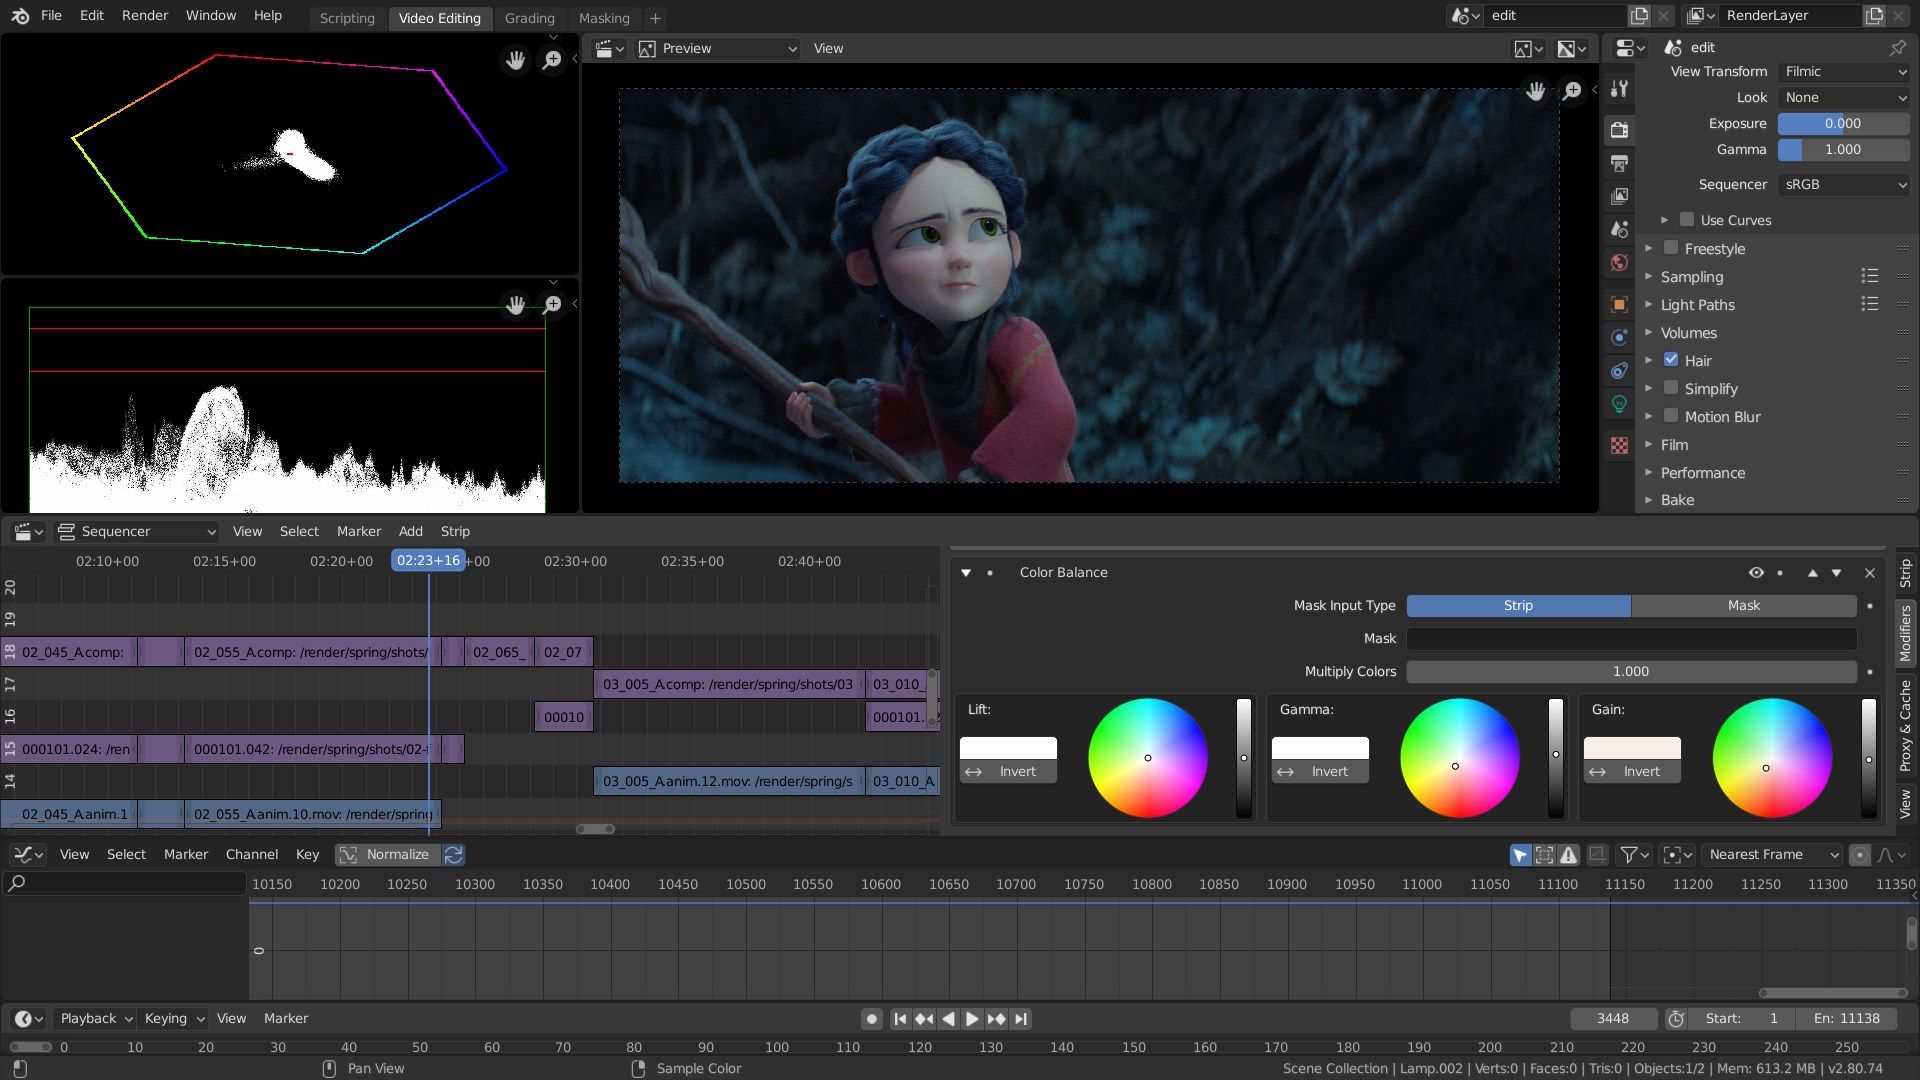 Blender offers tools for your projects from start to end, including video editing to make that final edit.